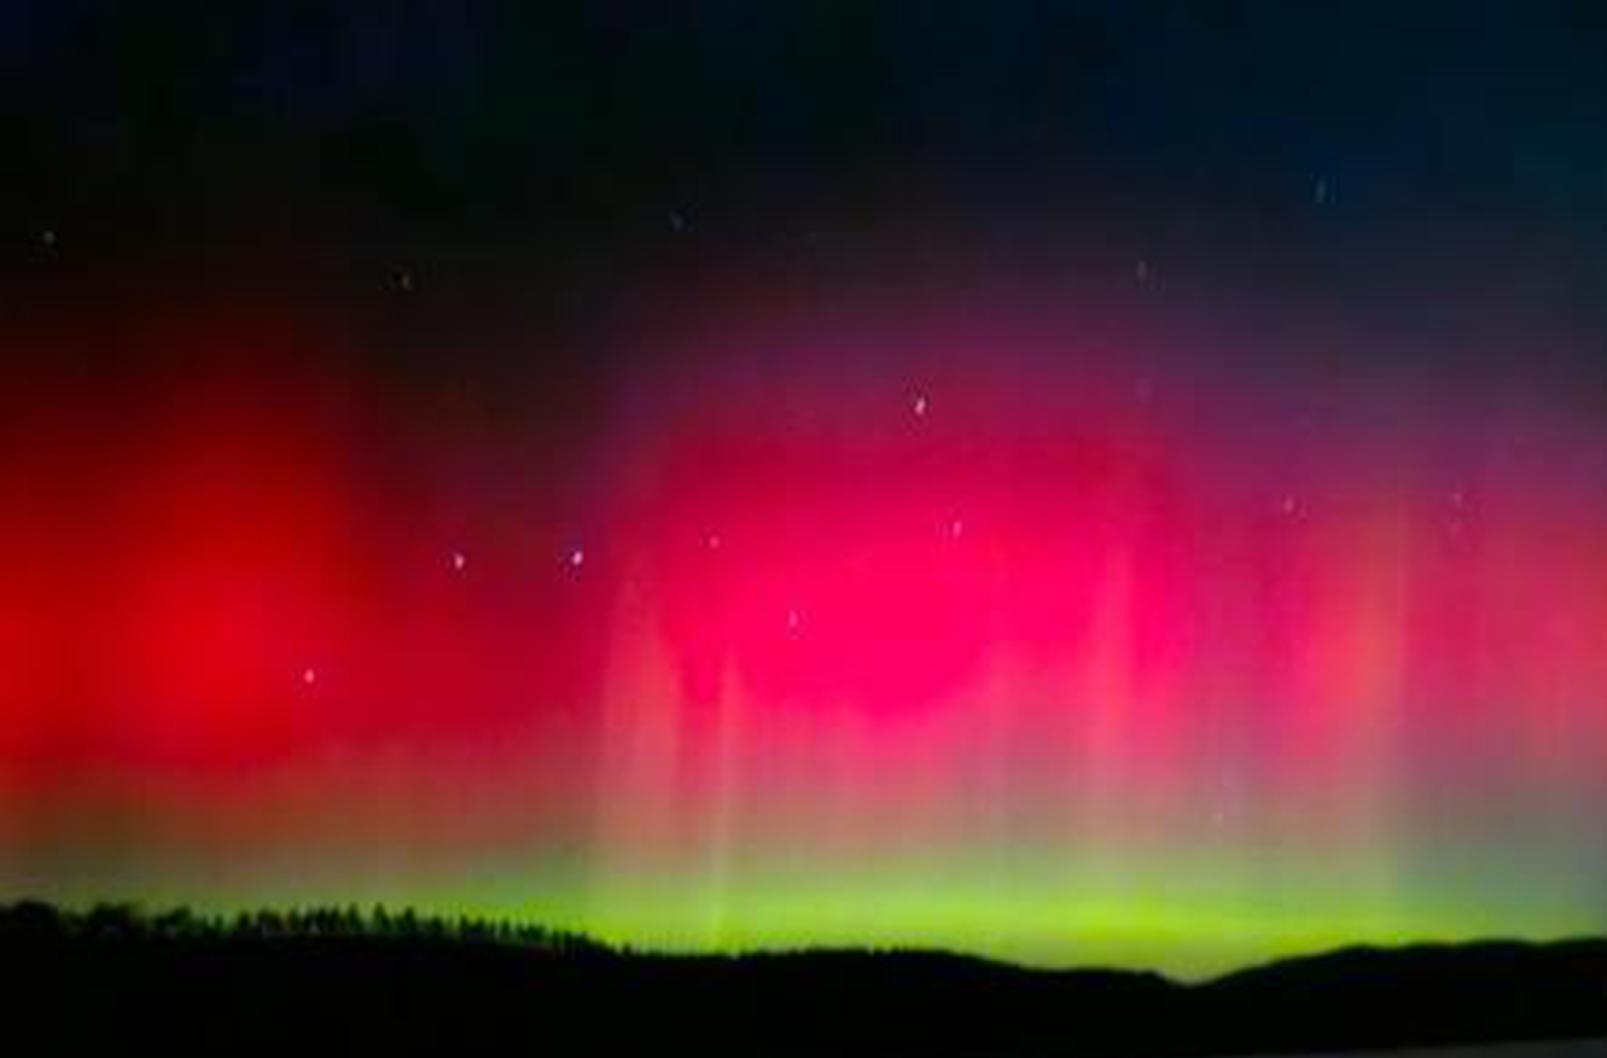 Northern China illuminated by stunning auroras over the weekend